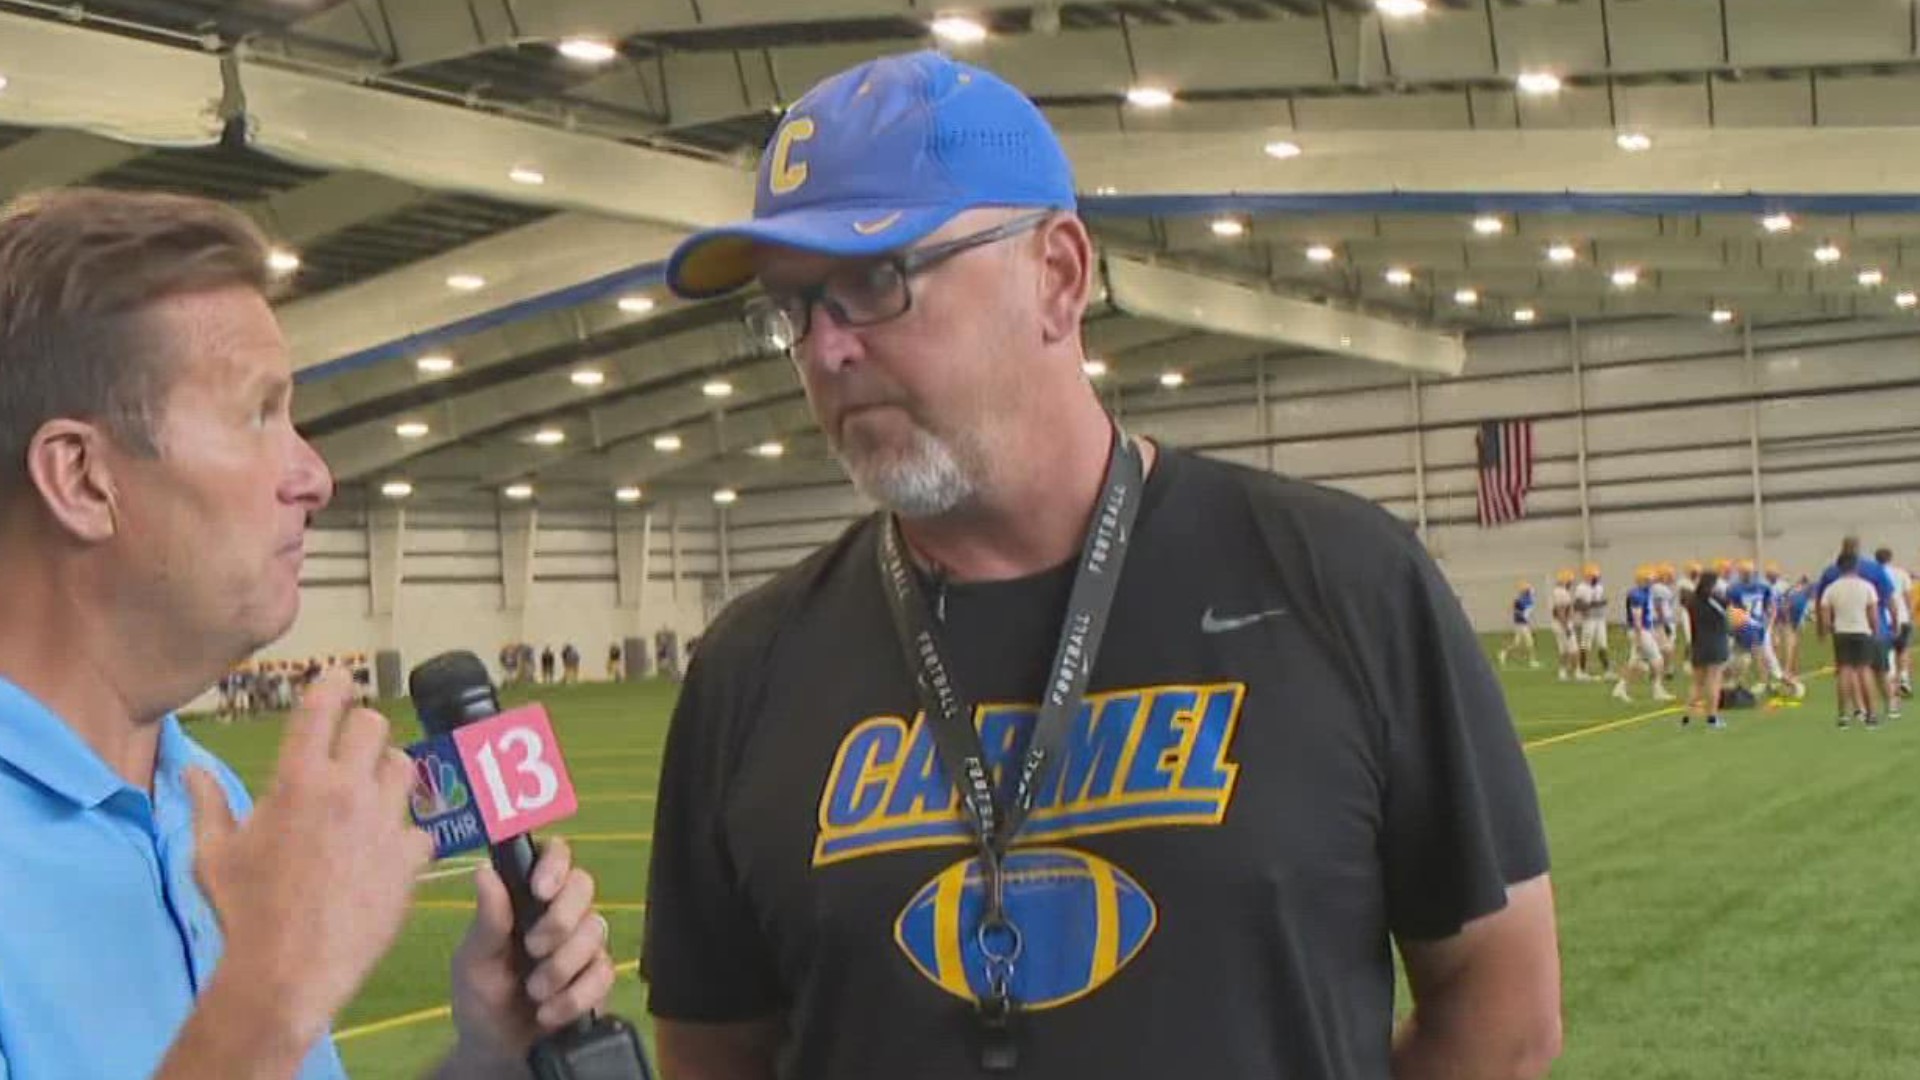 Our sports director Dave Calabro checks in with the Carmel Greyhounds as they gear up for the season.